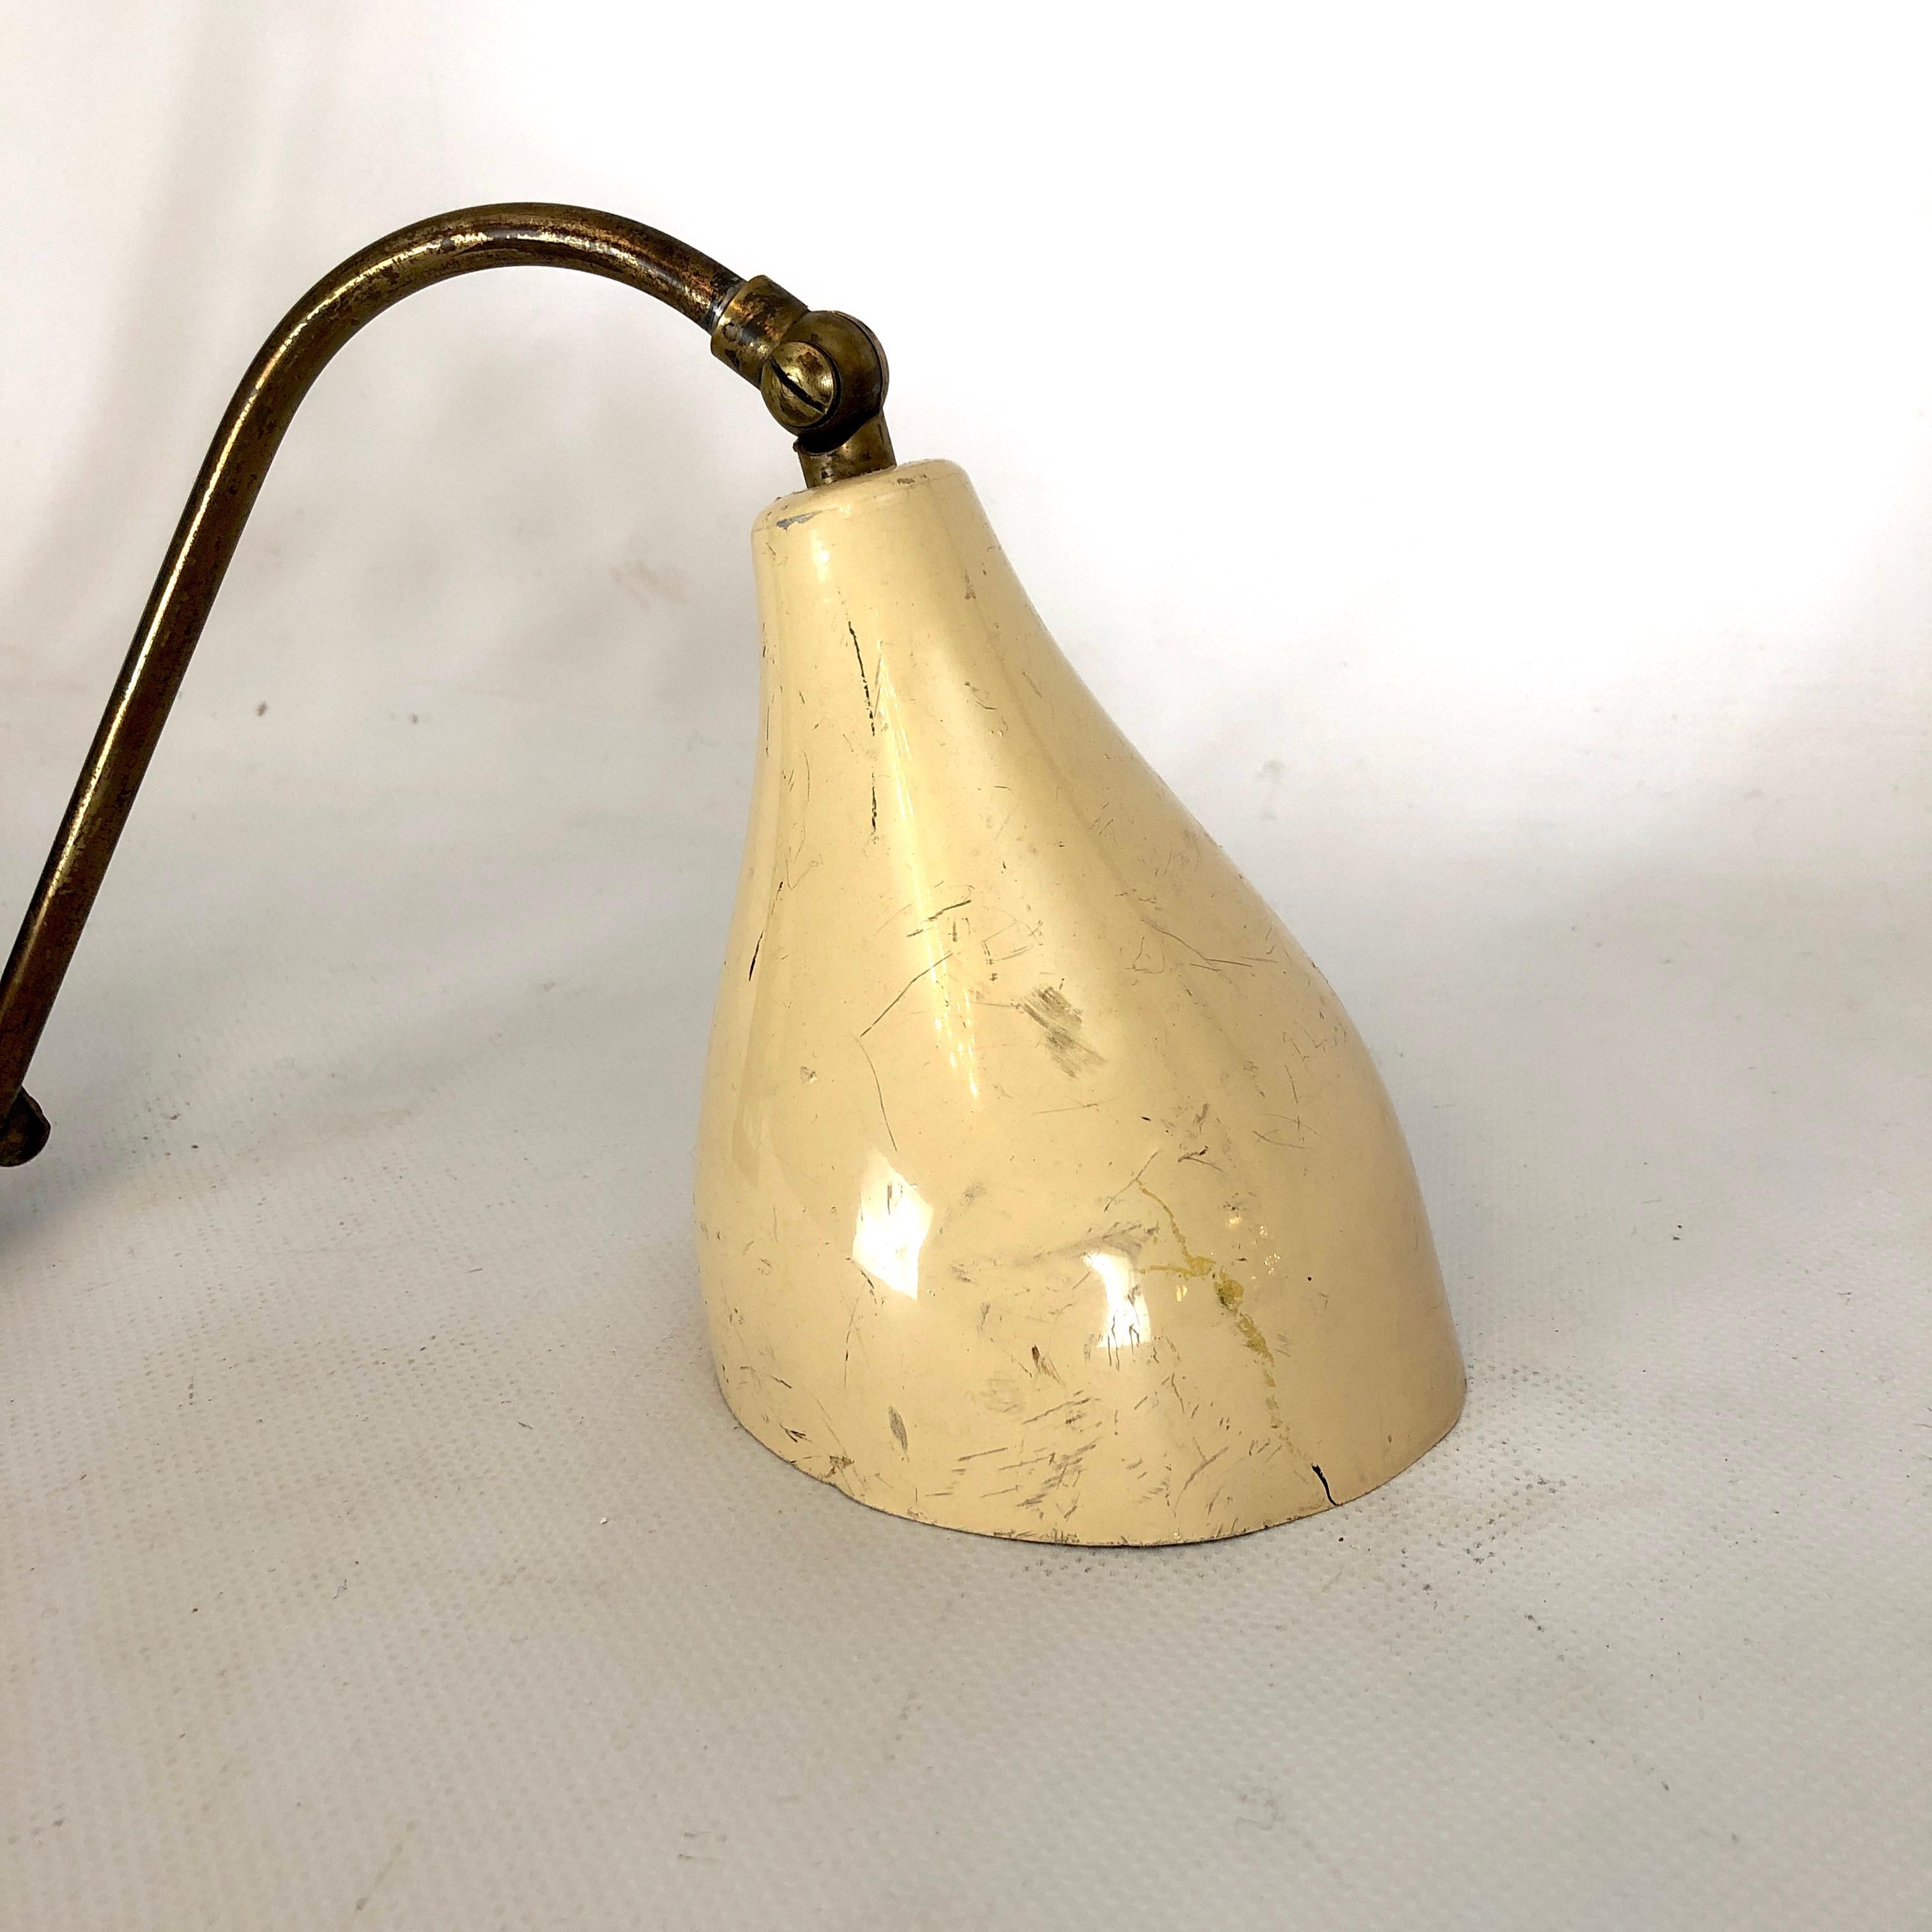 Good vintage condition with trace of age and use, brass with patina. Produced in Italy during the 1950s. Full working with EU standard, adaptable on demand for USA standard.